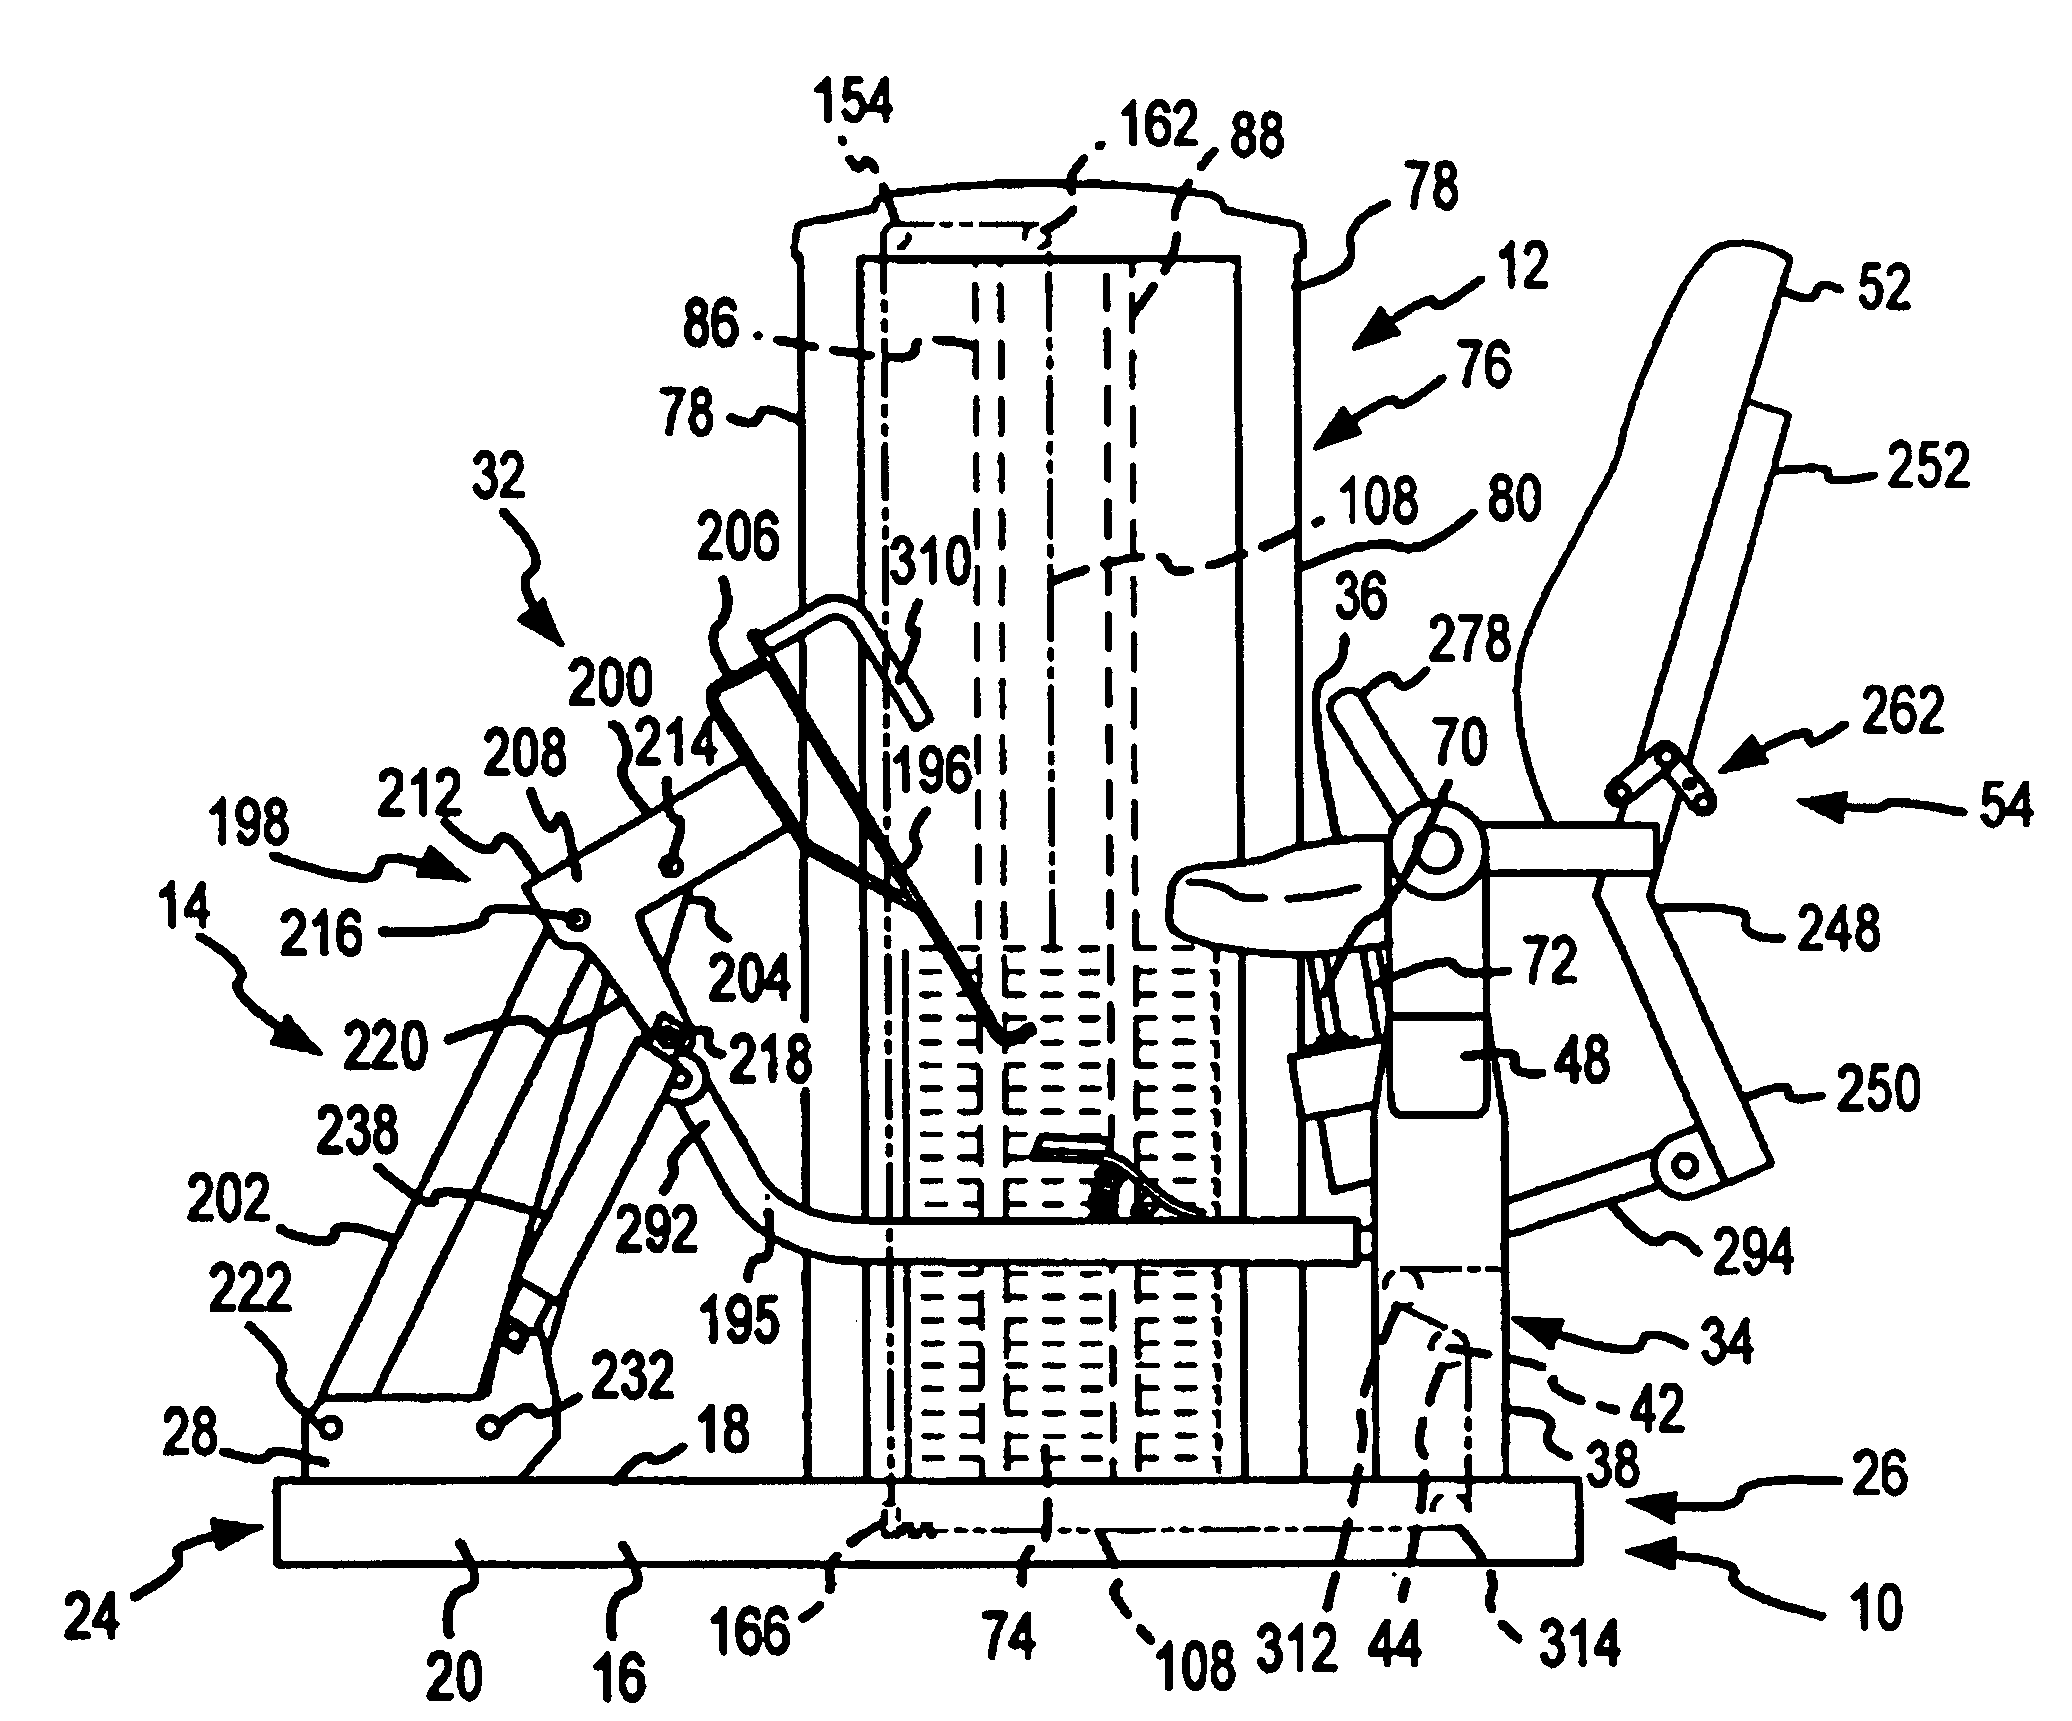 Exercise device with body extension mechanism